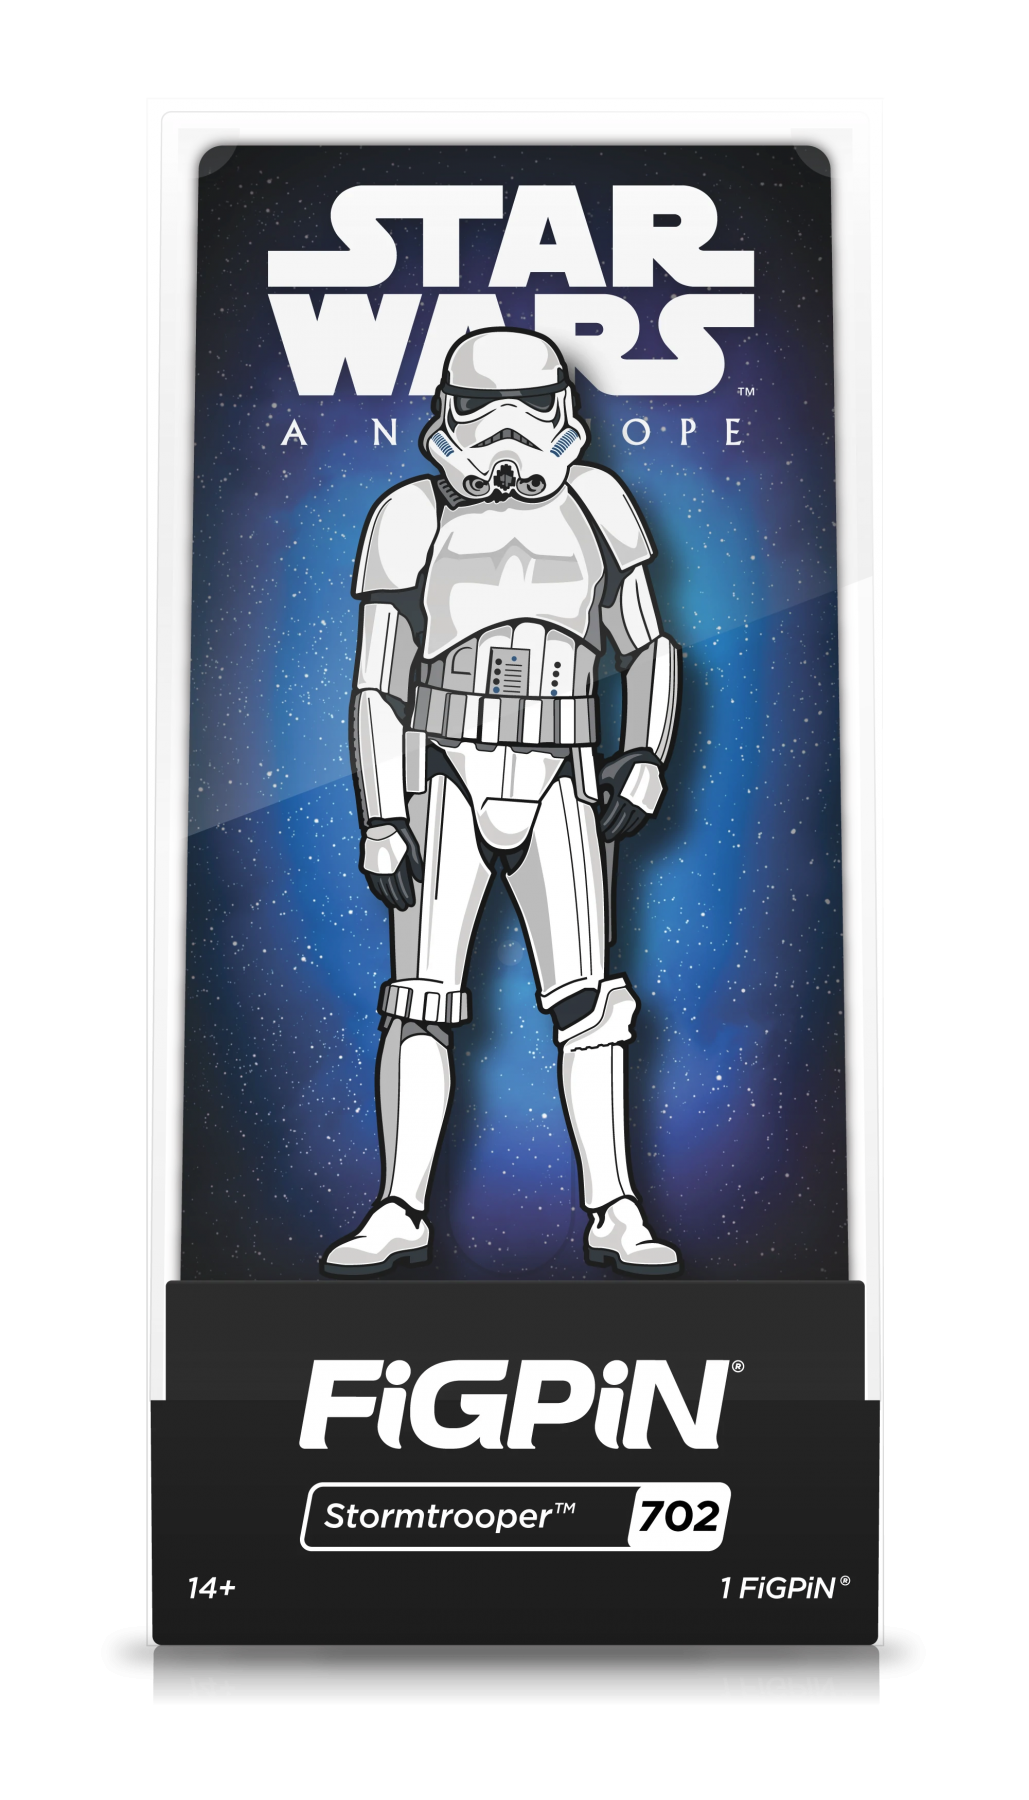 FiGPiN Stormtrooper (702) Collectable Enamel Pin MKQ3AIGYD2 |28279|